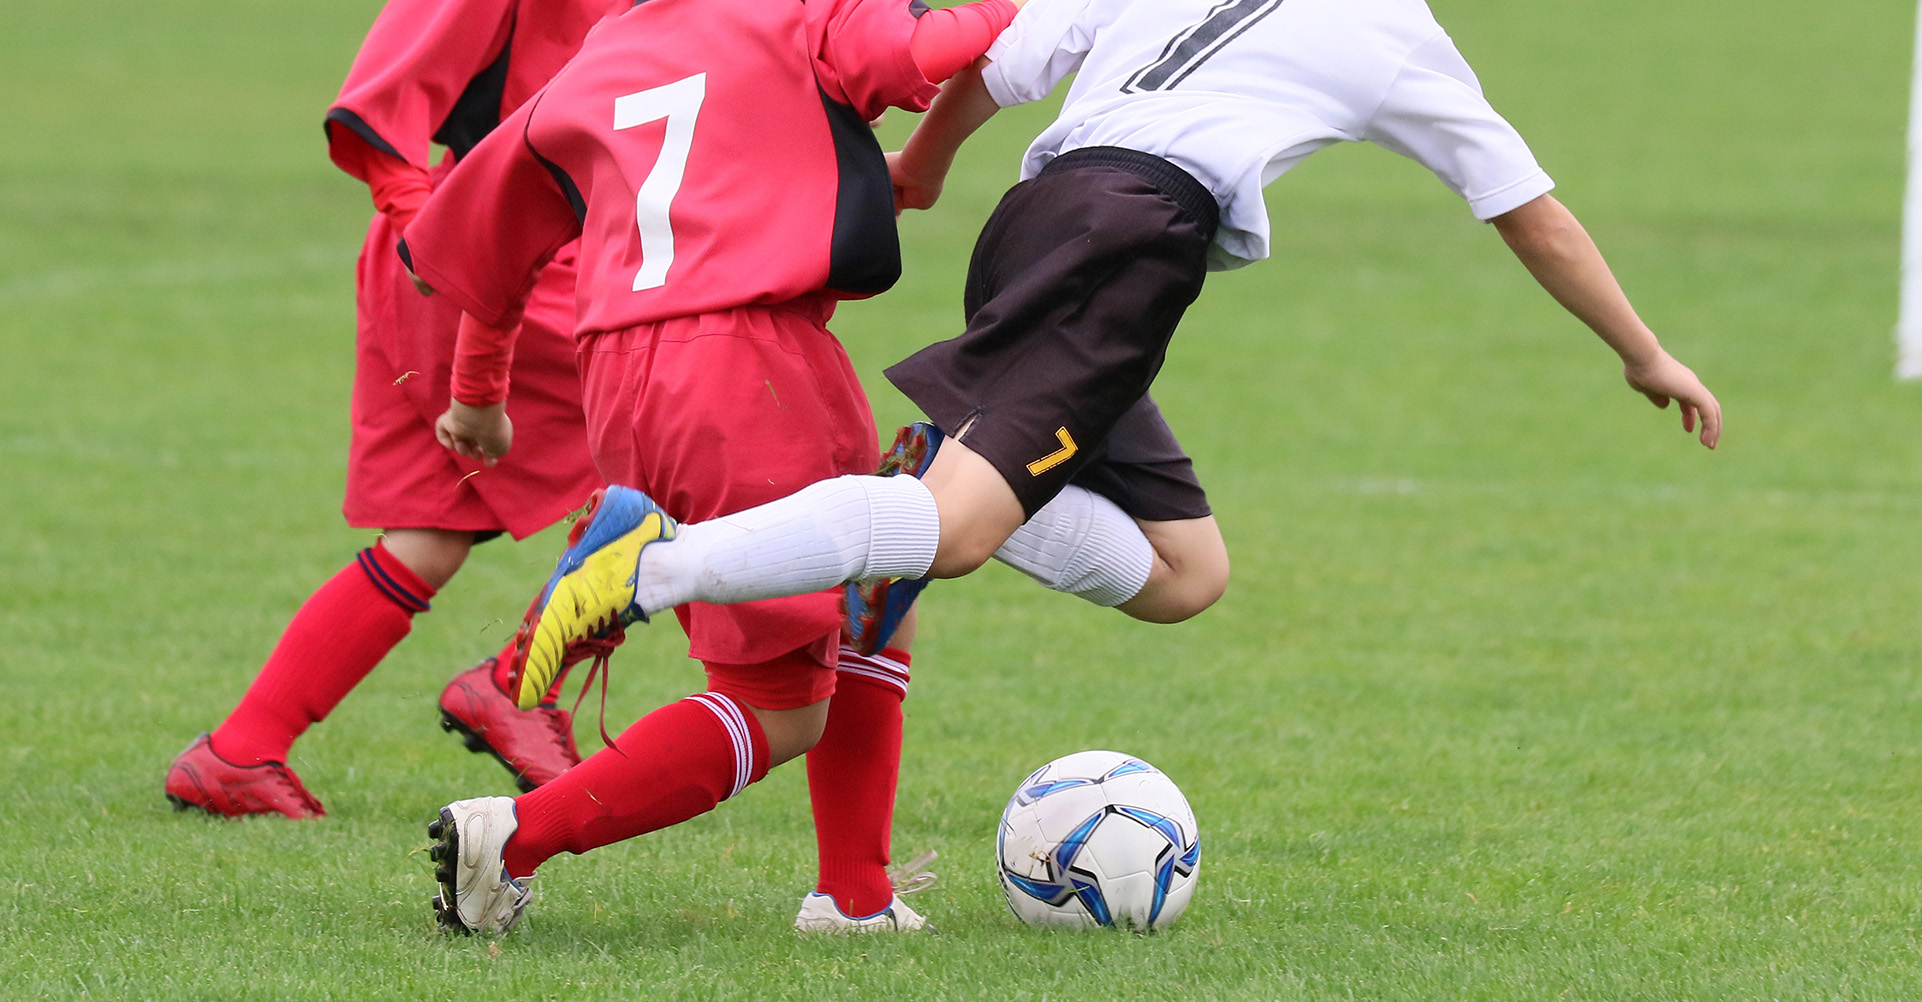 Sports Injury, Sporting Accidents, Tackles, Sport Injuries, Compensation